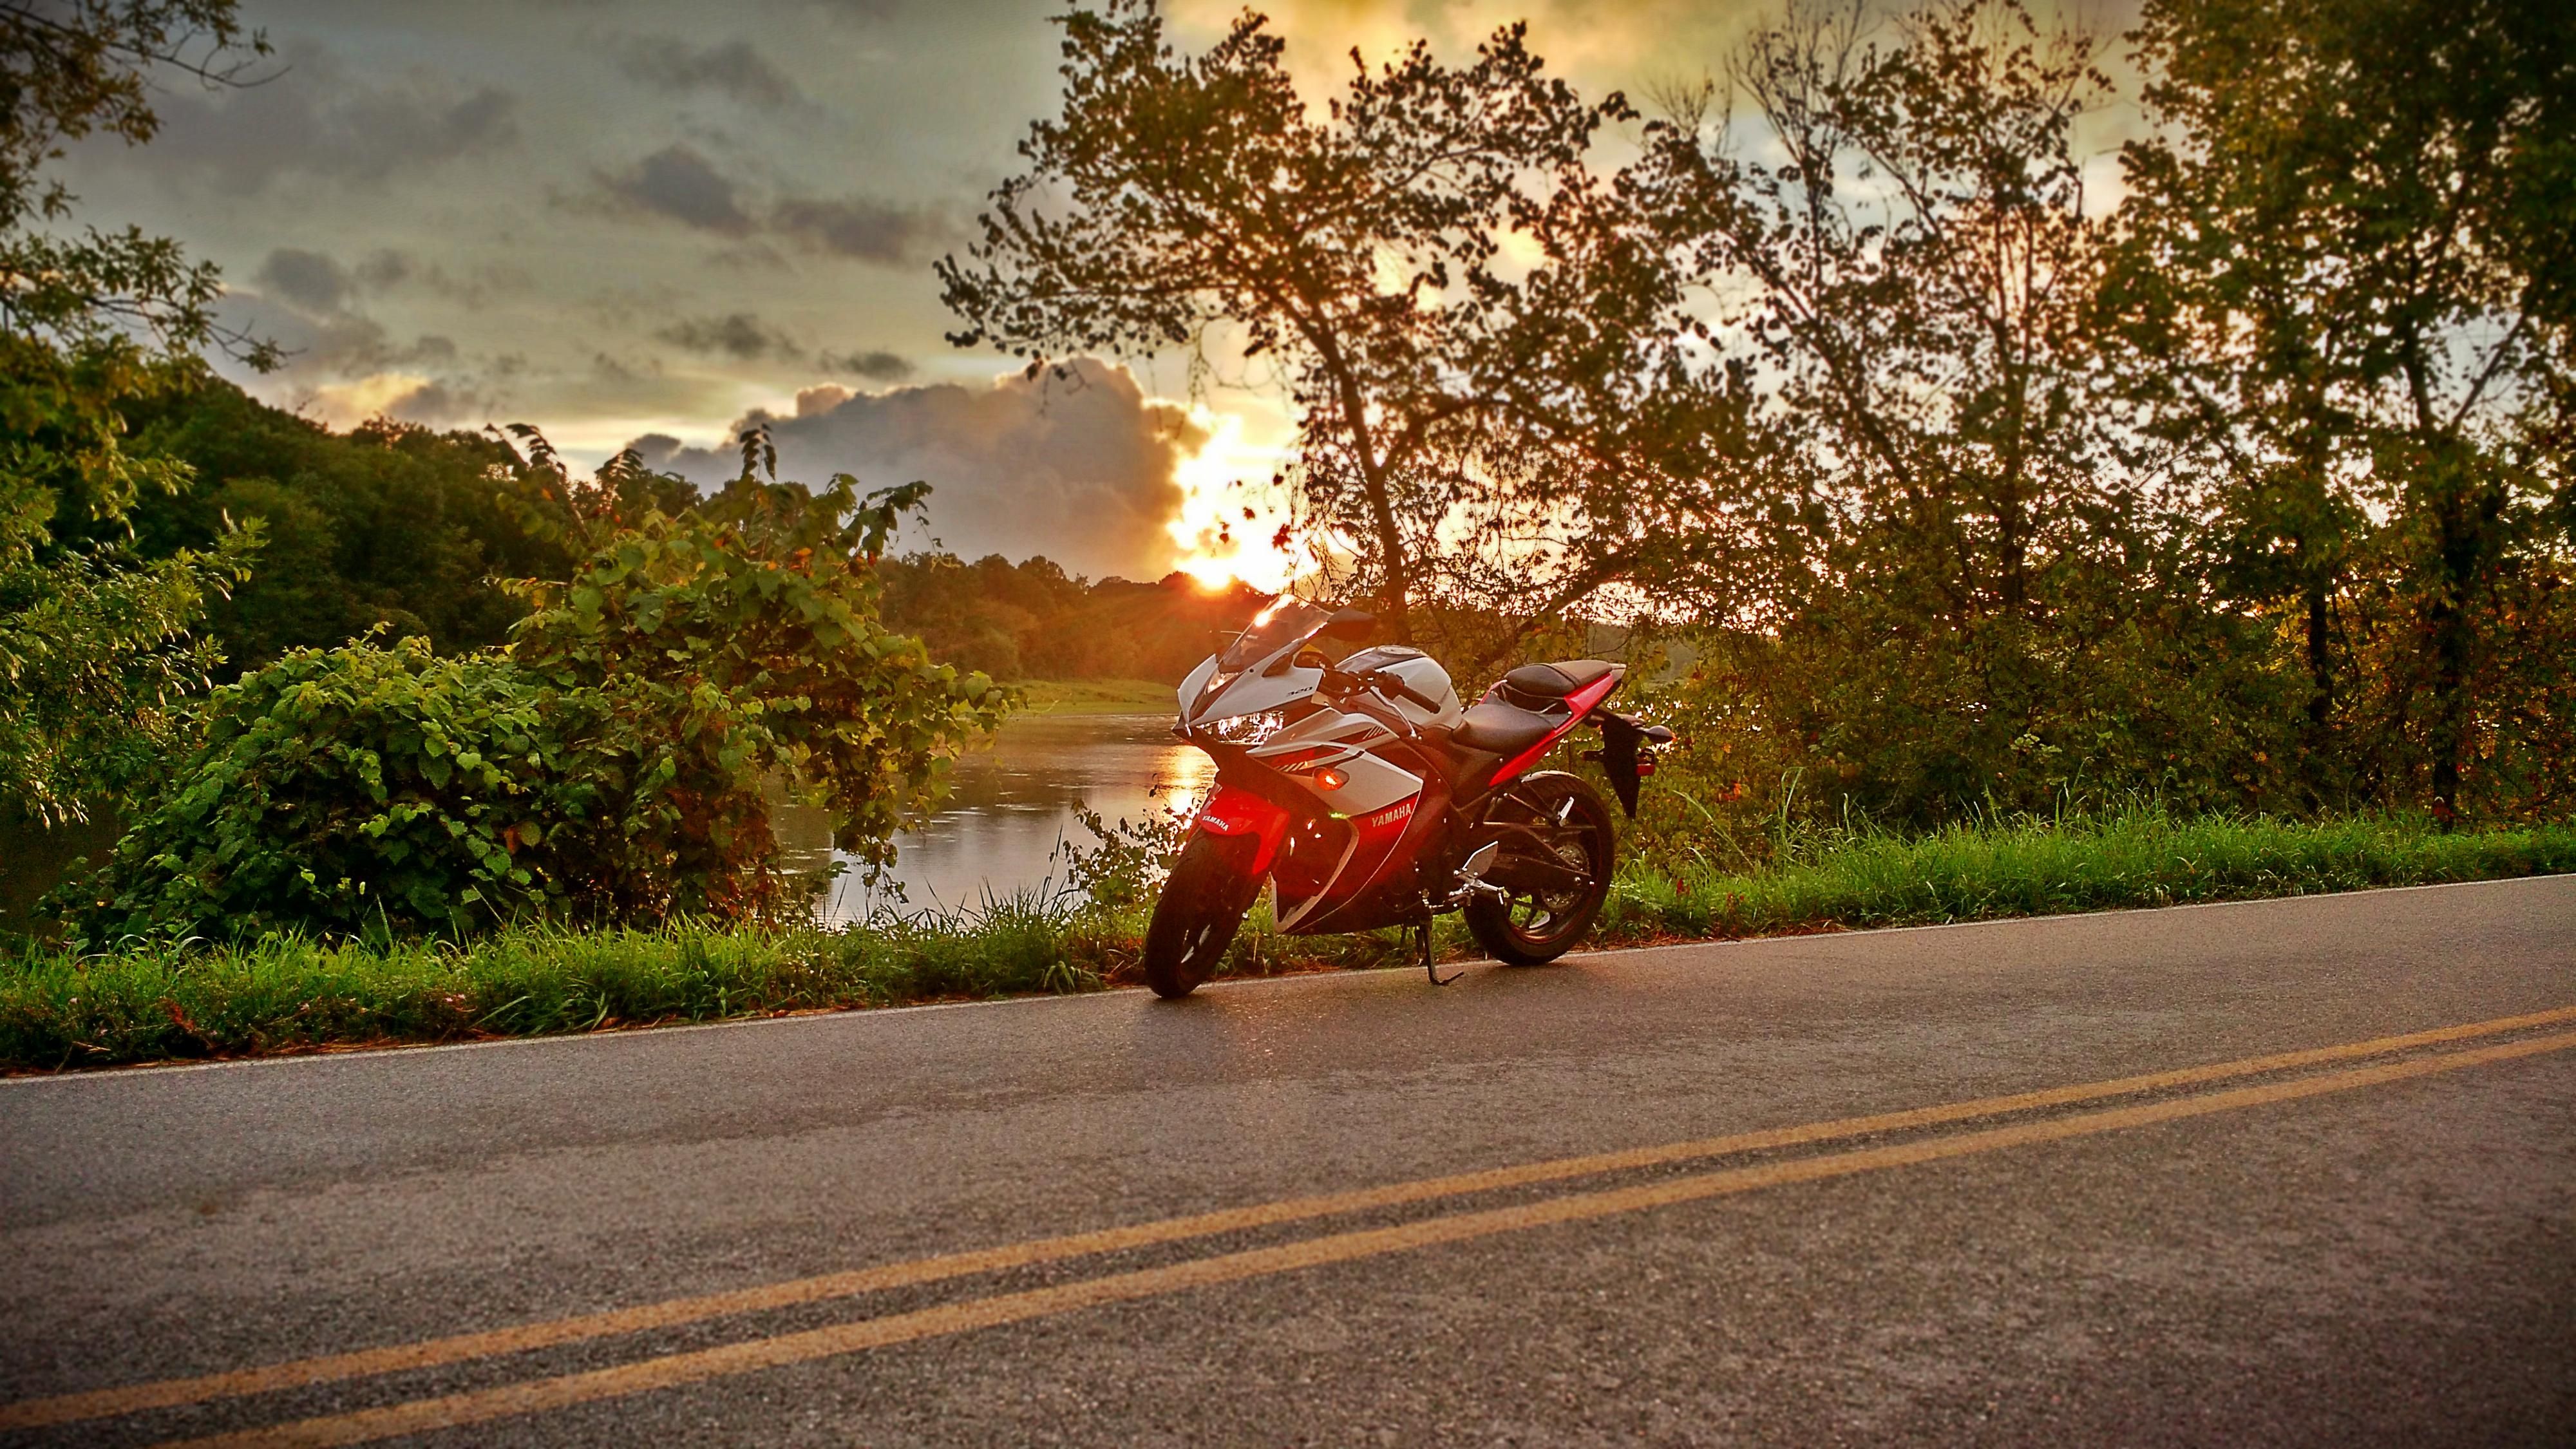 2016 Yamaha R3 At Sunset Hd Wallpaper From Gallsource - Highway , HD Wallpaper & Backgrounds